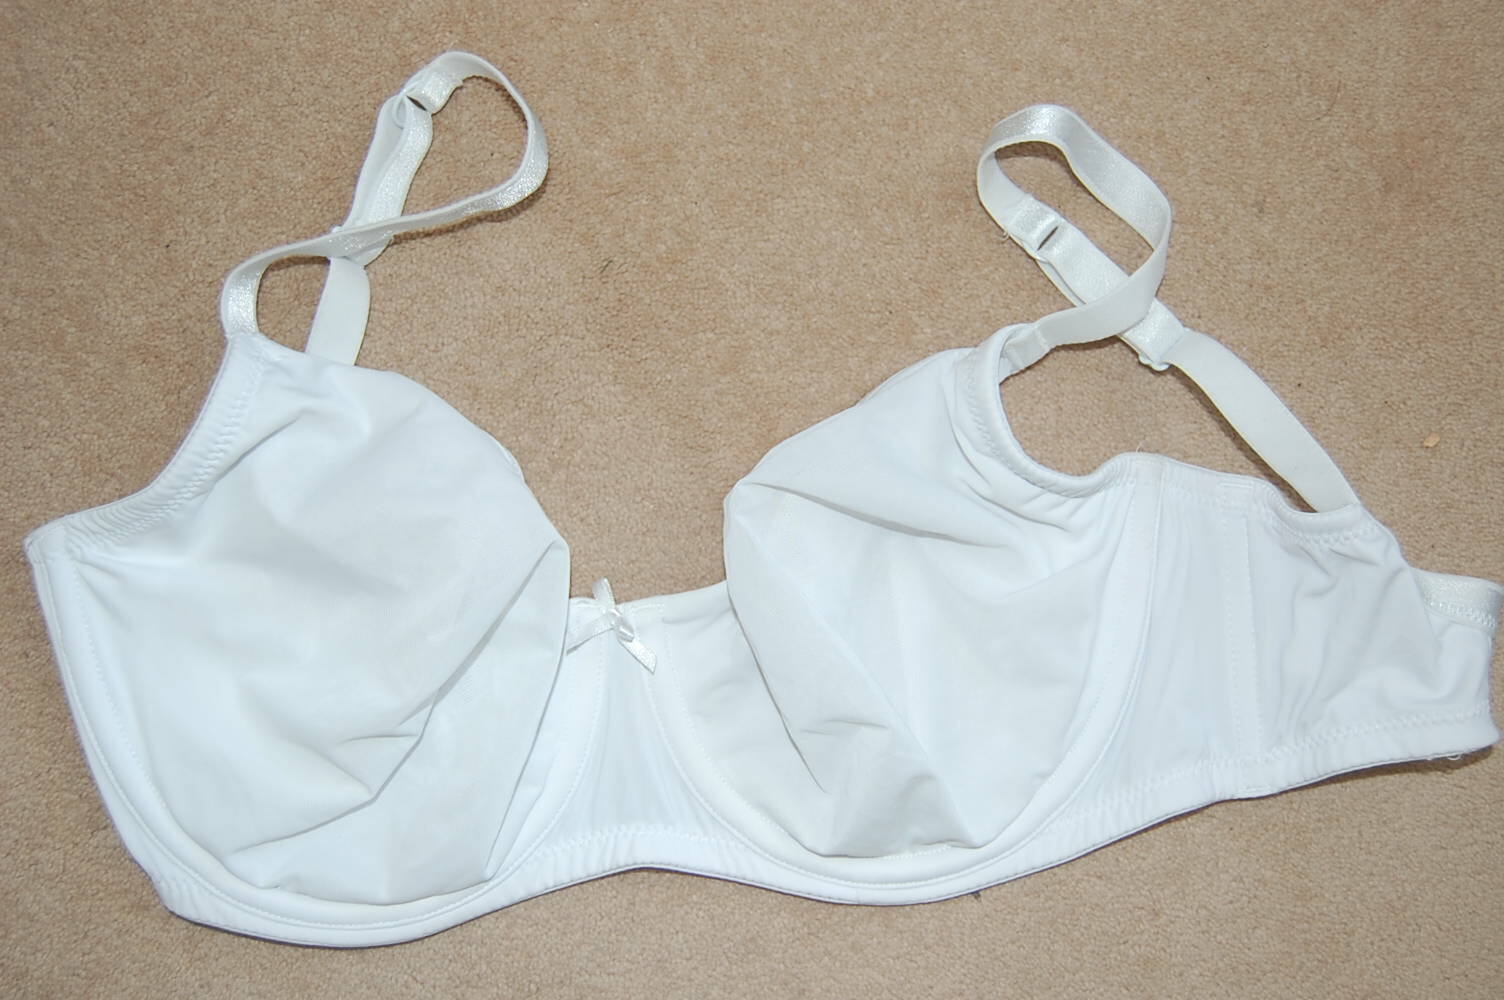 Womens White Bra size 34E New without tags F&F